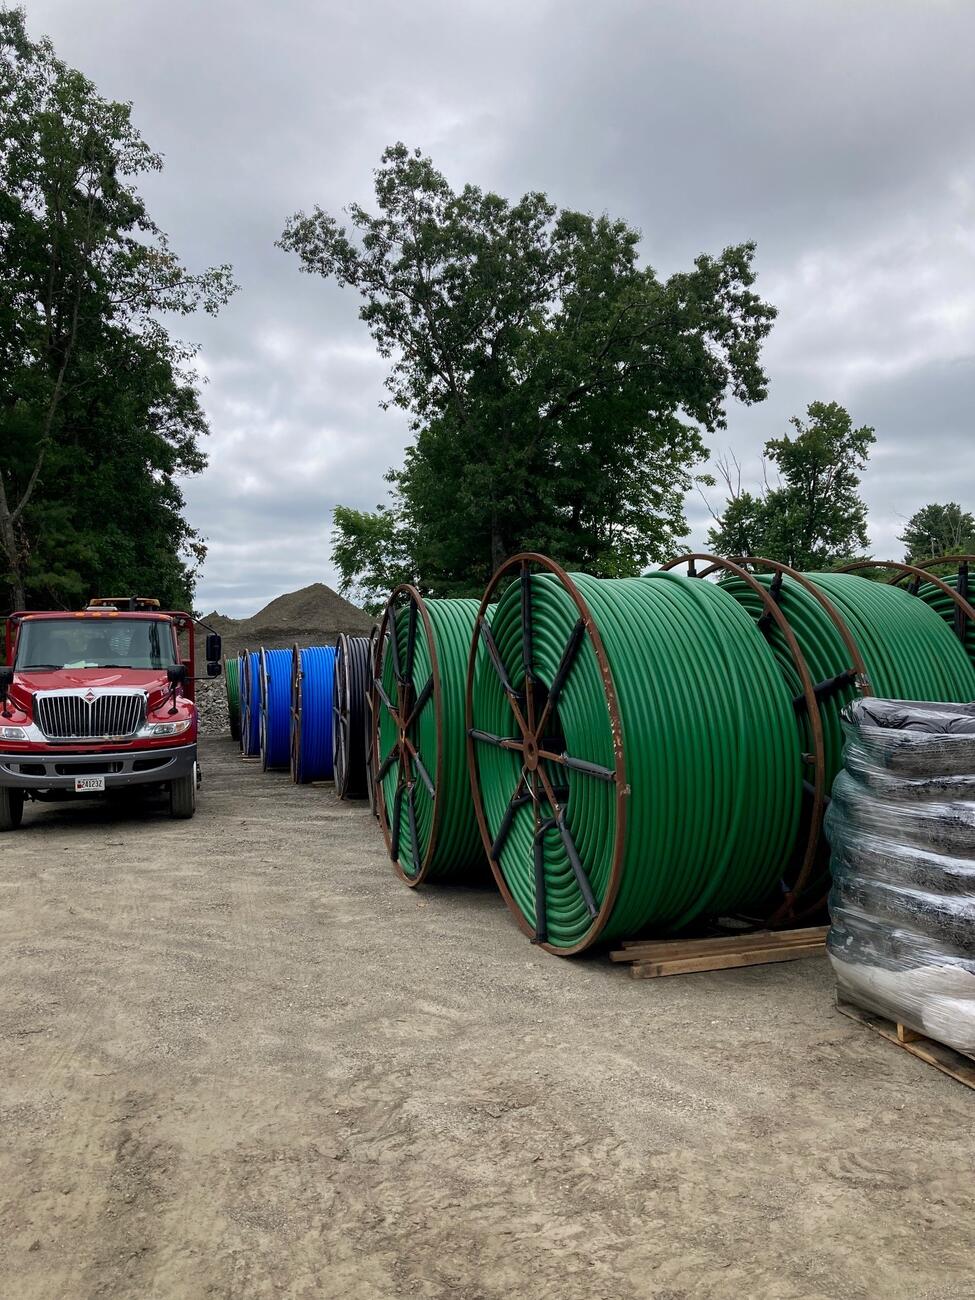 Large reels of green and blue innerduct sit outside next to a red truck.